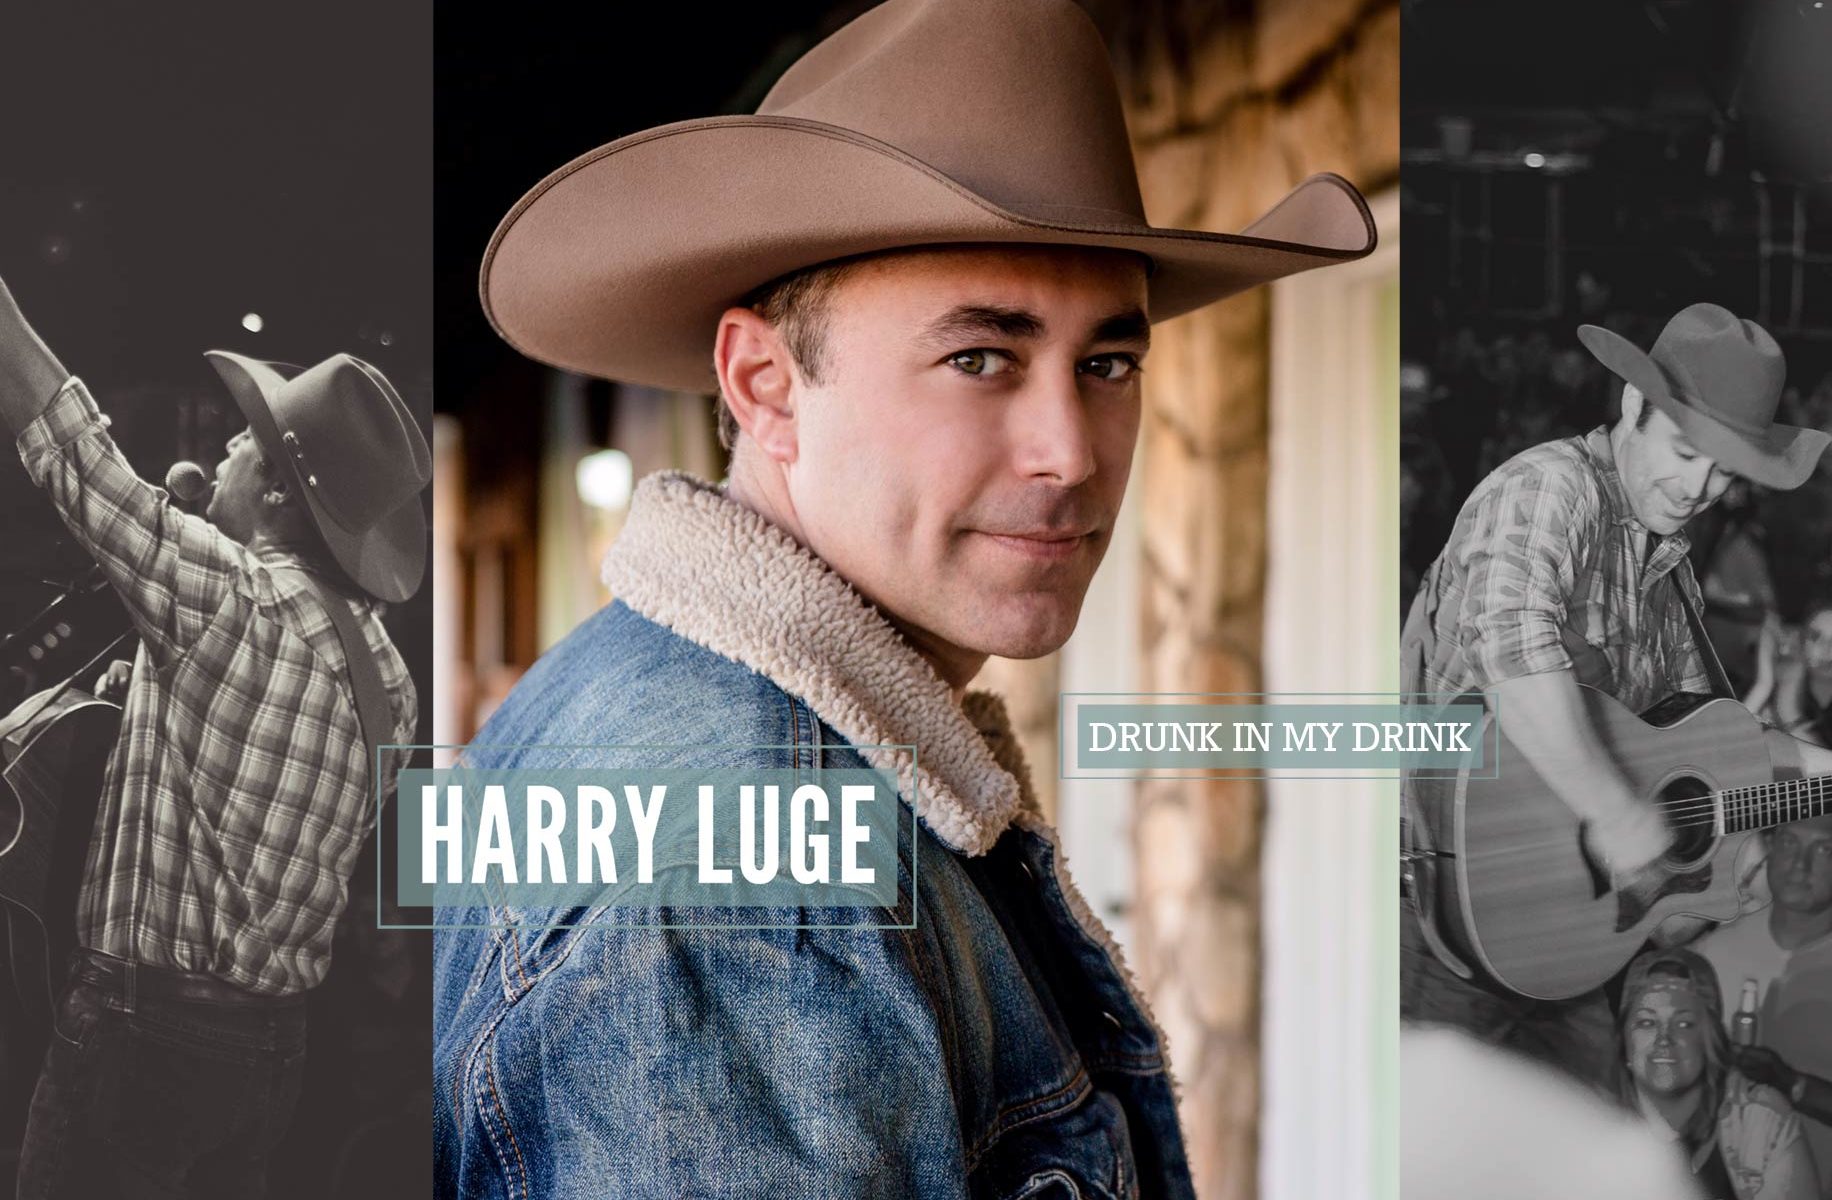 DRUNK IN MY DRINK By HARRY LUGE : New Country Single Hits Oct. 27